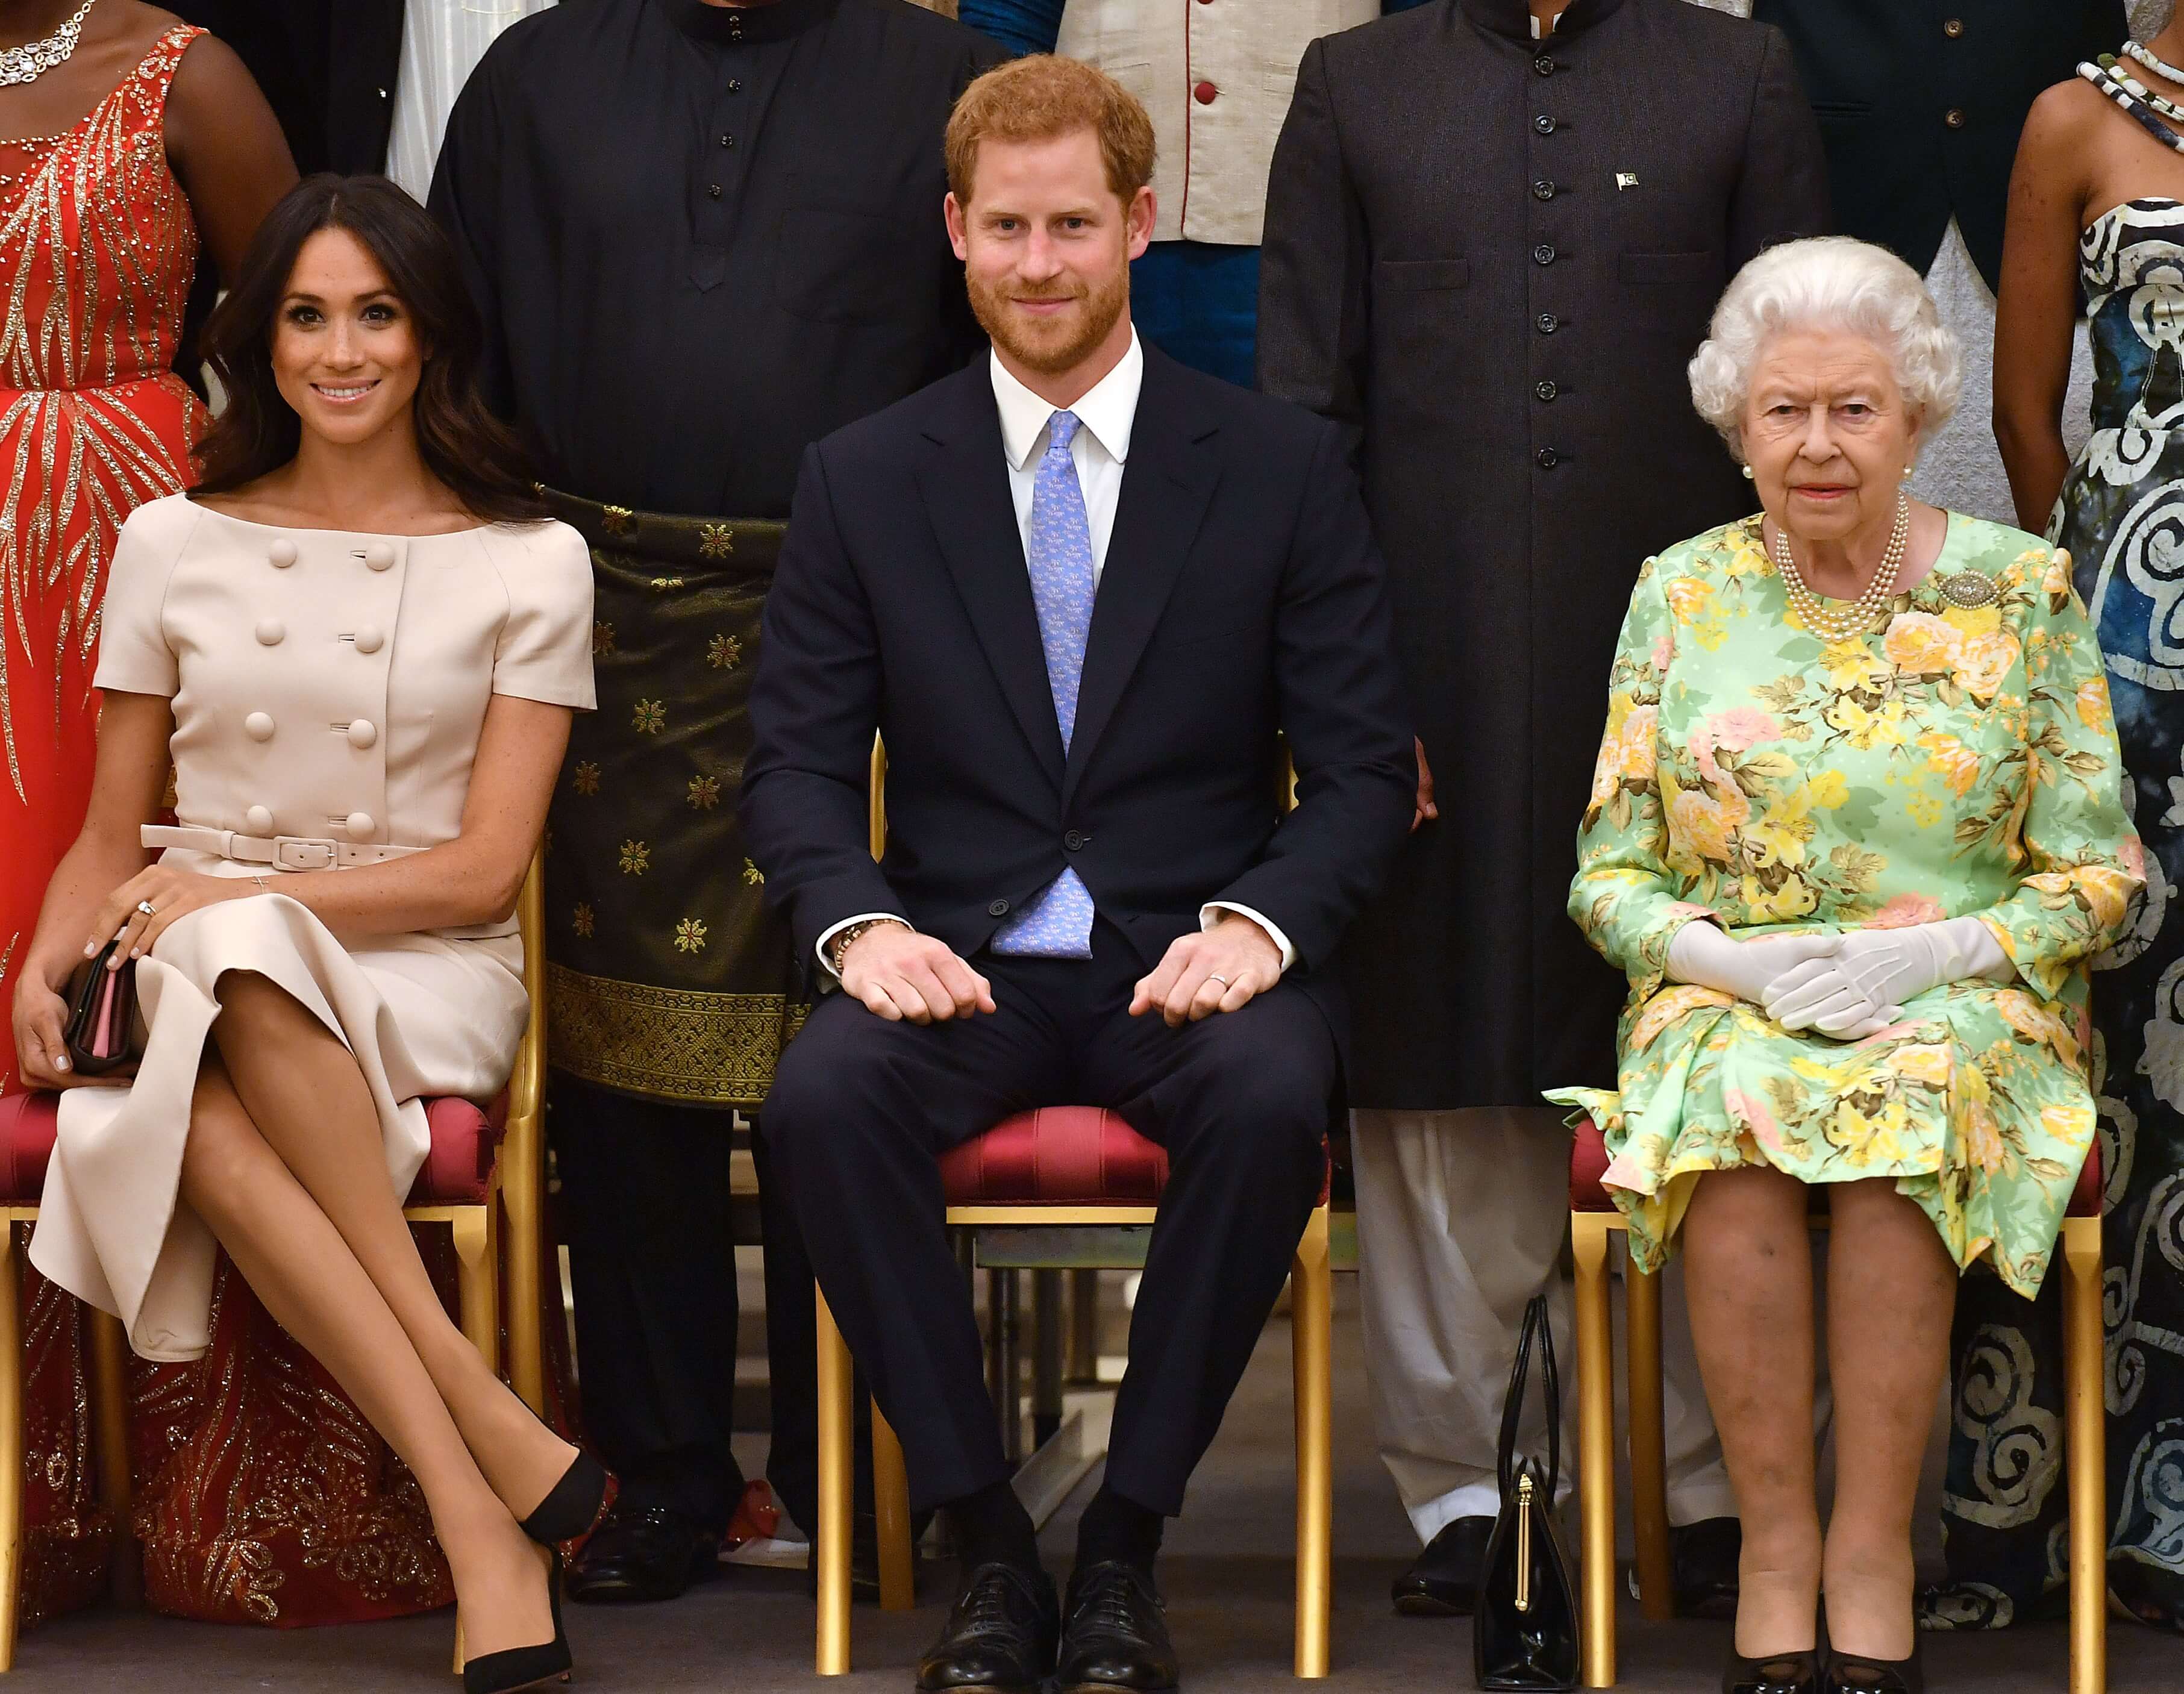 Meghan Markle, Prince Harry, and Queen Elizabeth II at the Queen's Young Leaders Awards Ceremony in 2018